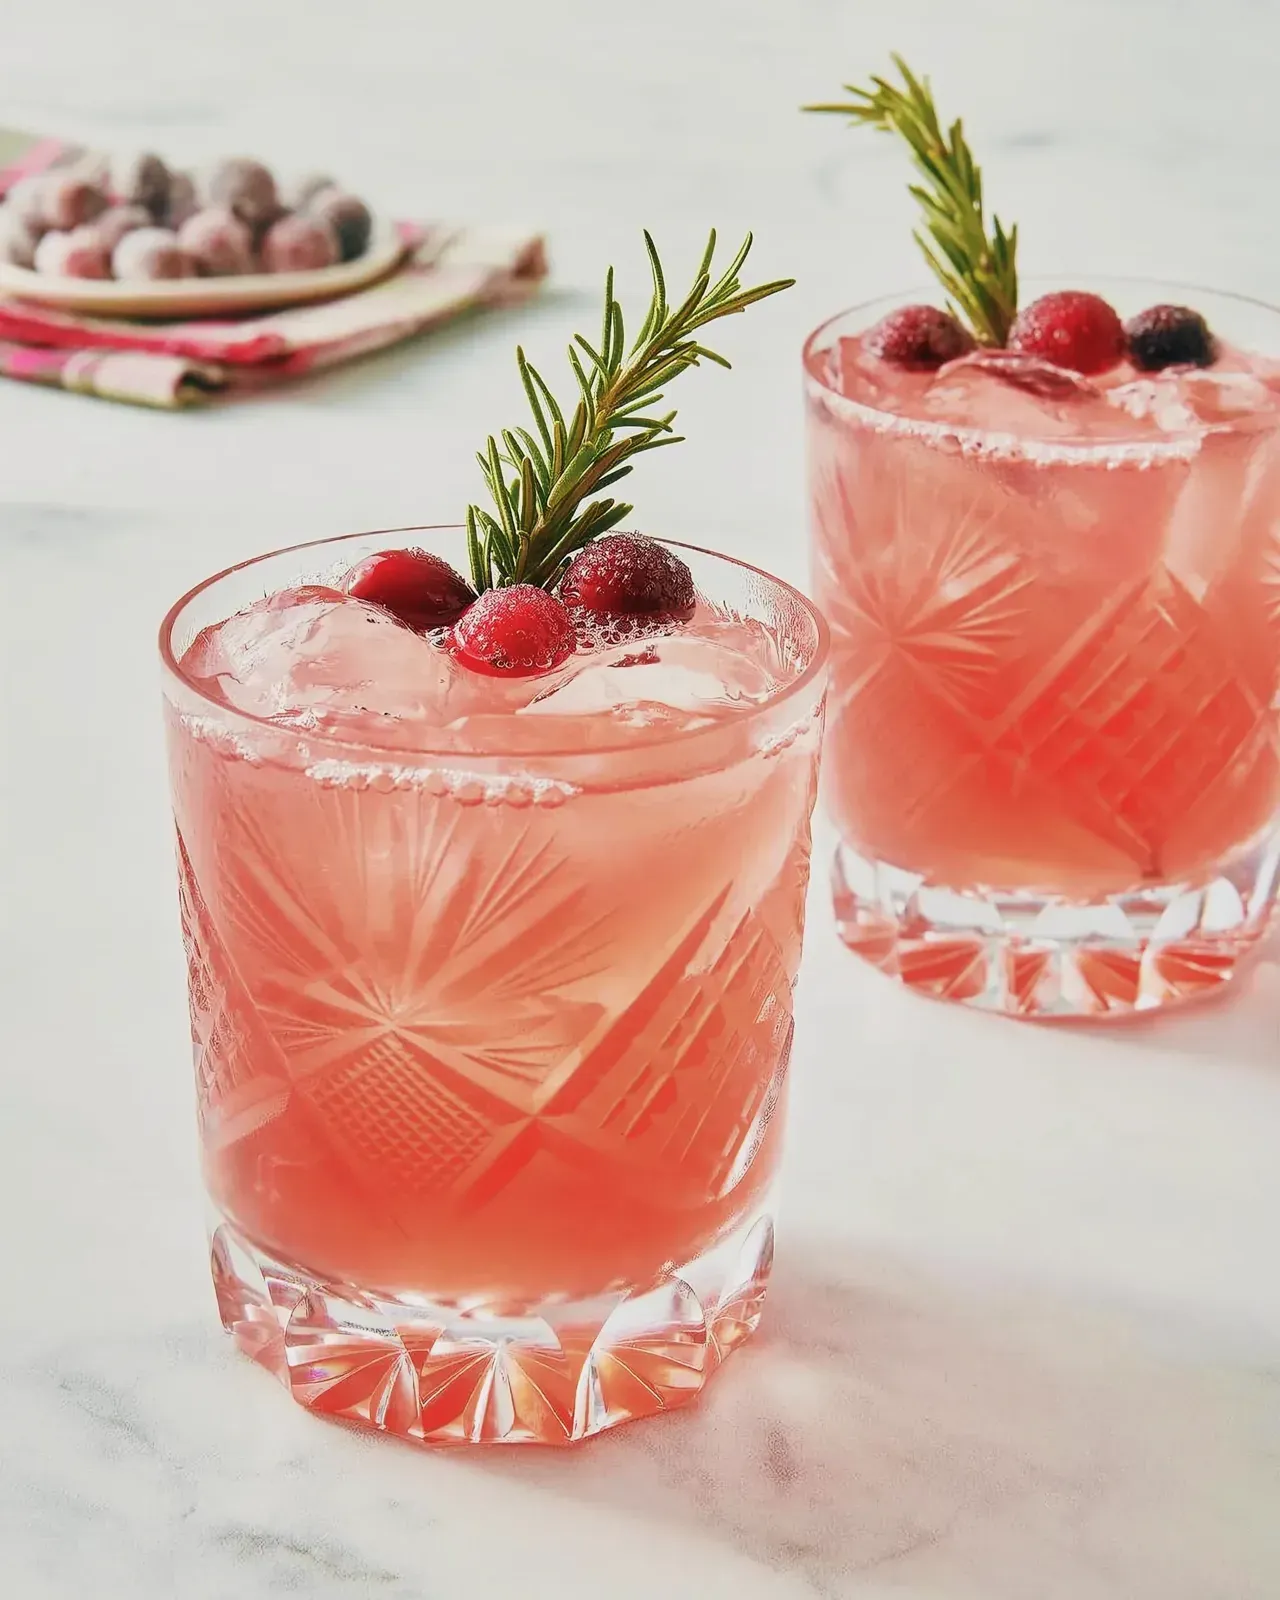 Two elegant glasses filled with a delightful pink-colored cocktail garnished with cranberries and rosemary.